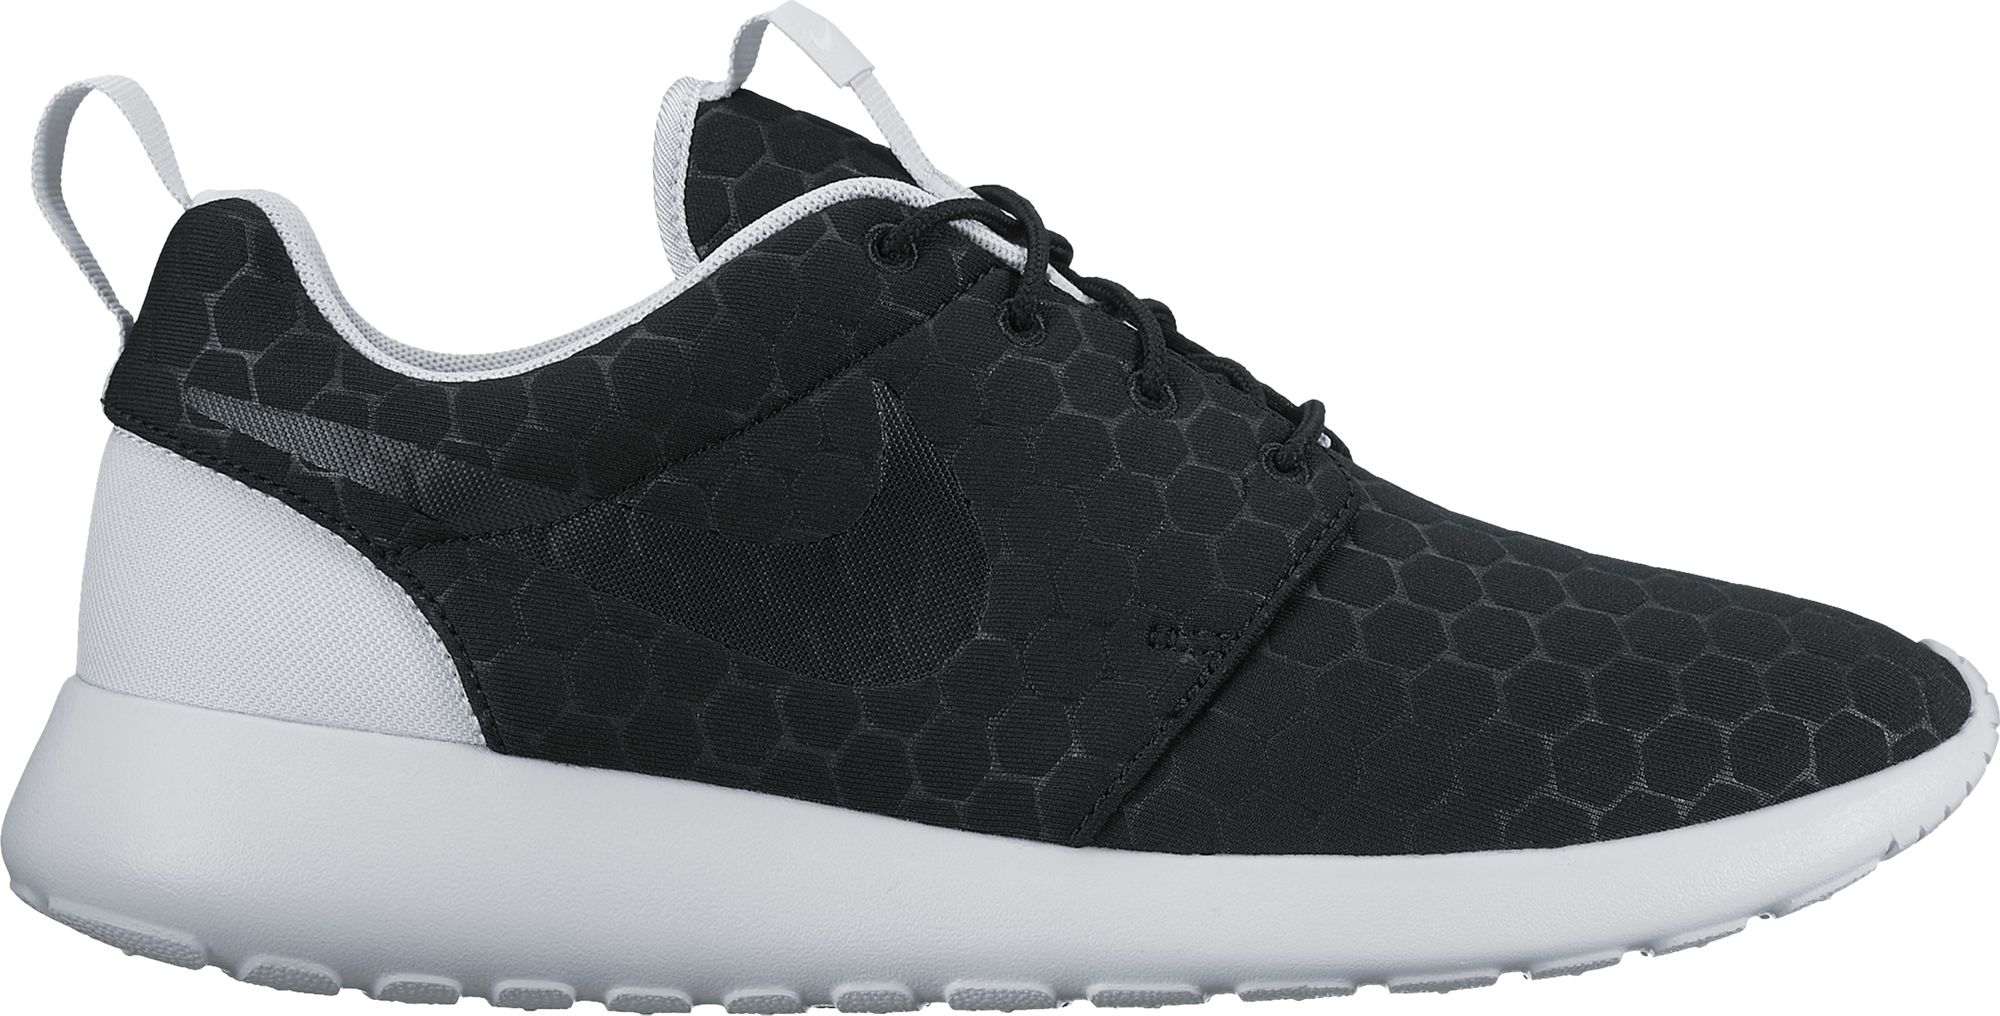 Men's Fashion Sneakers | DICK'S Sporting Goods